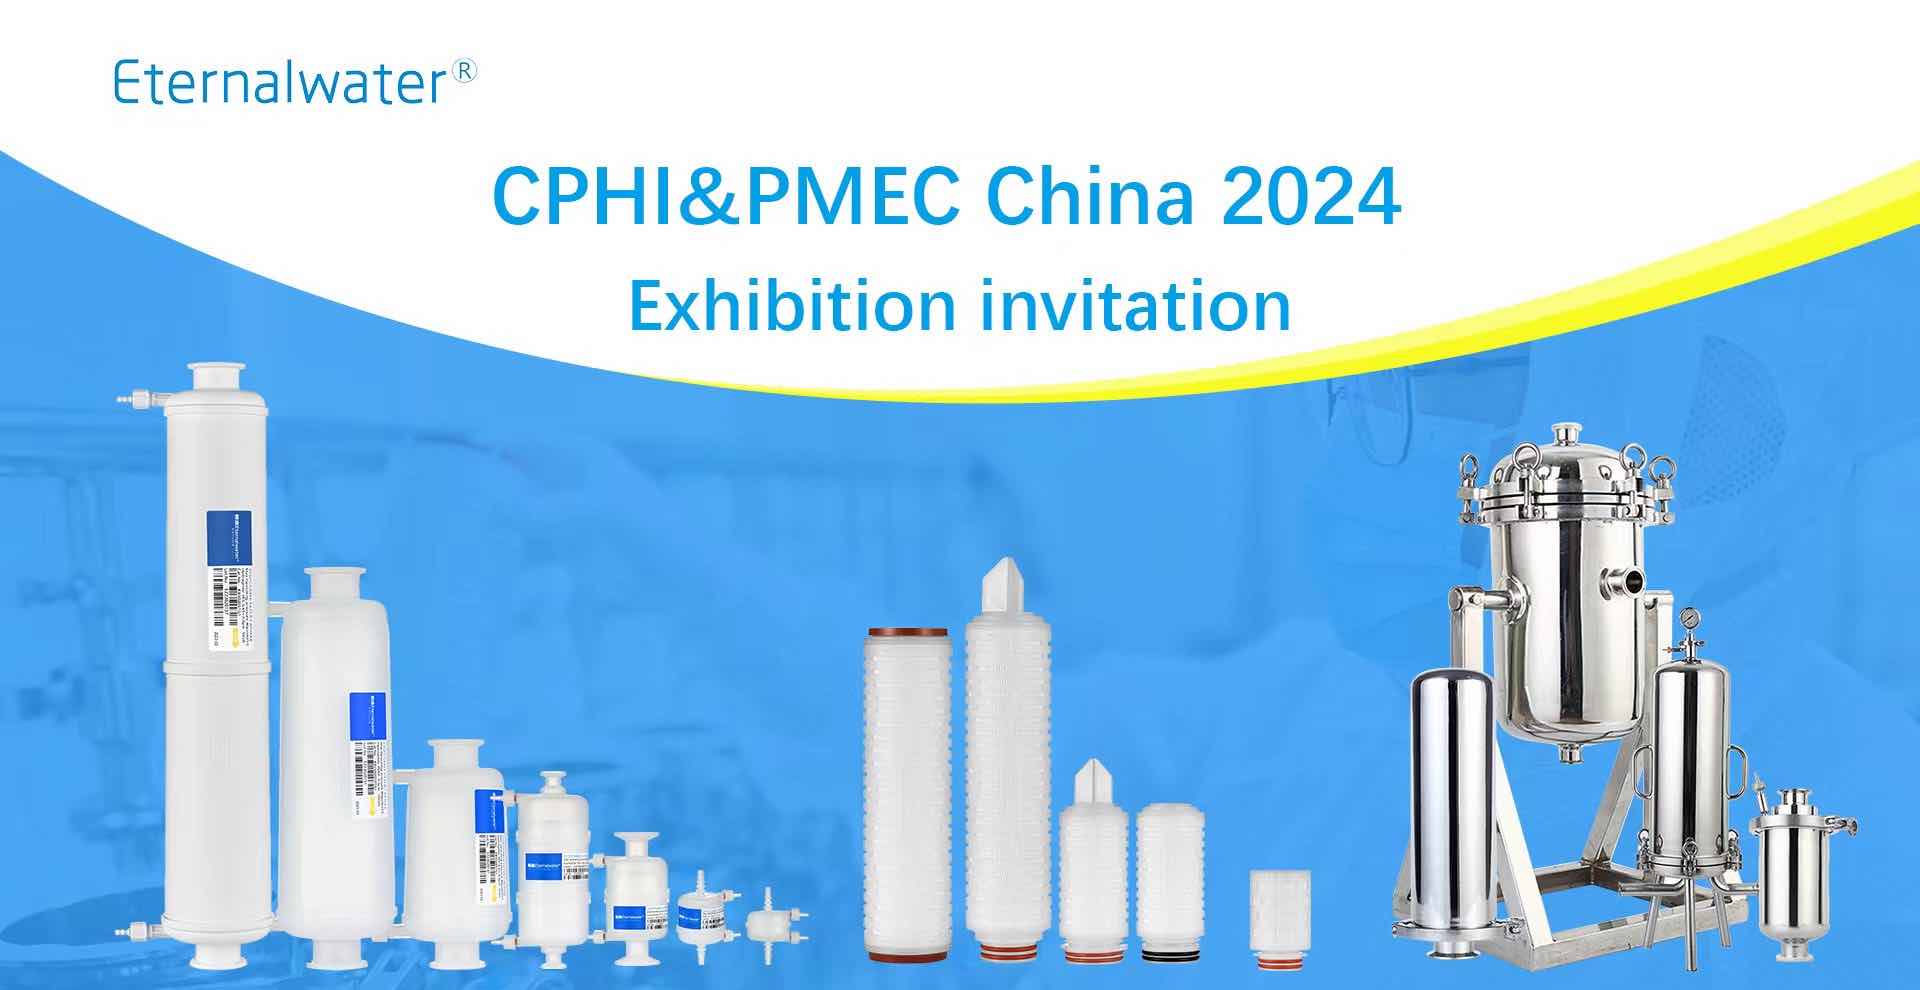 About CPHI&PMEC China 2024 - Eternalwater